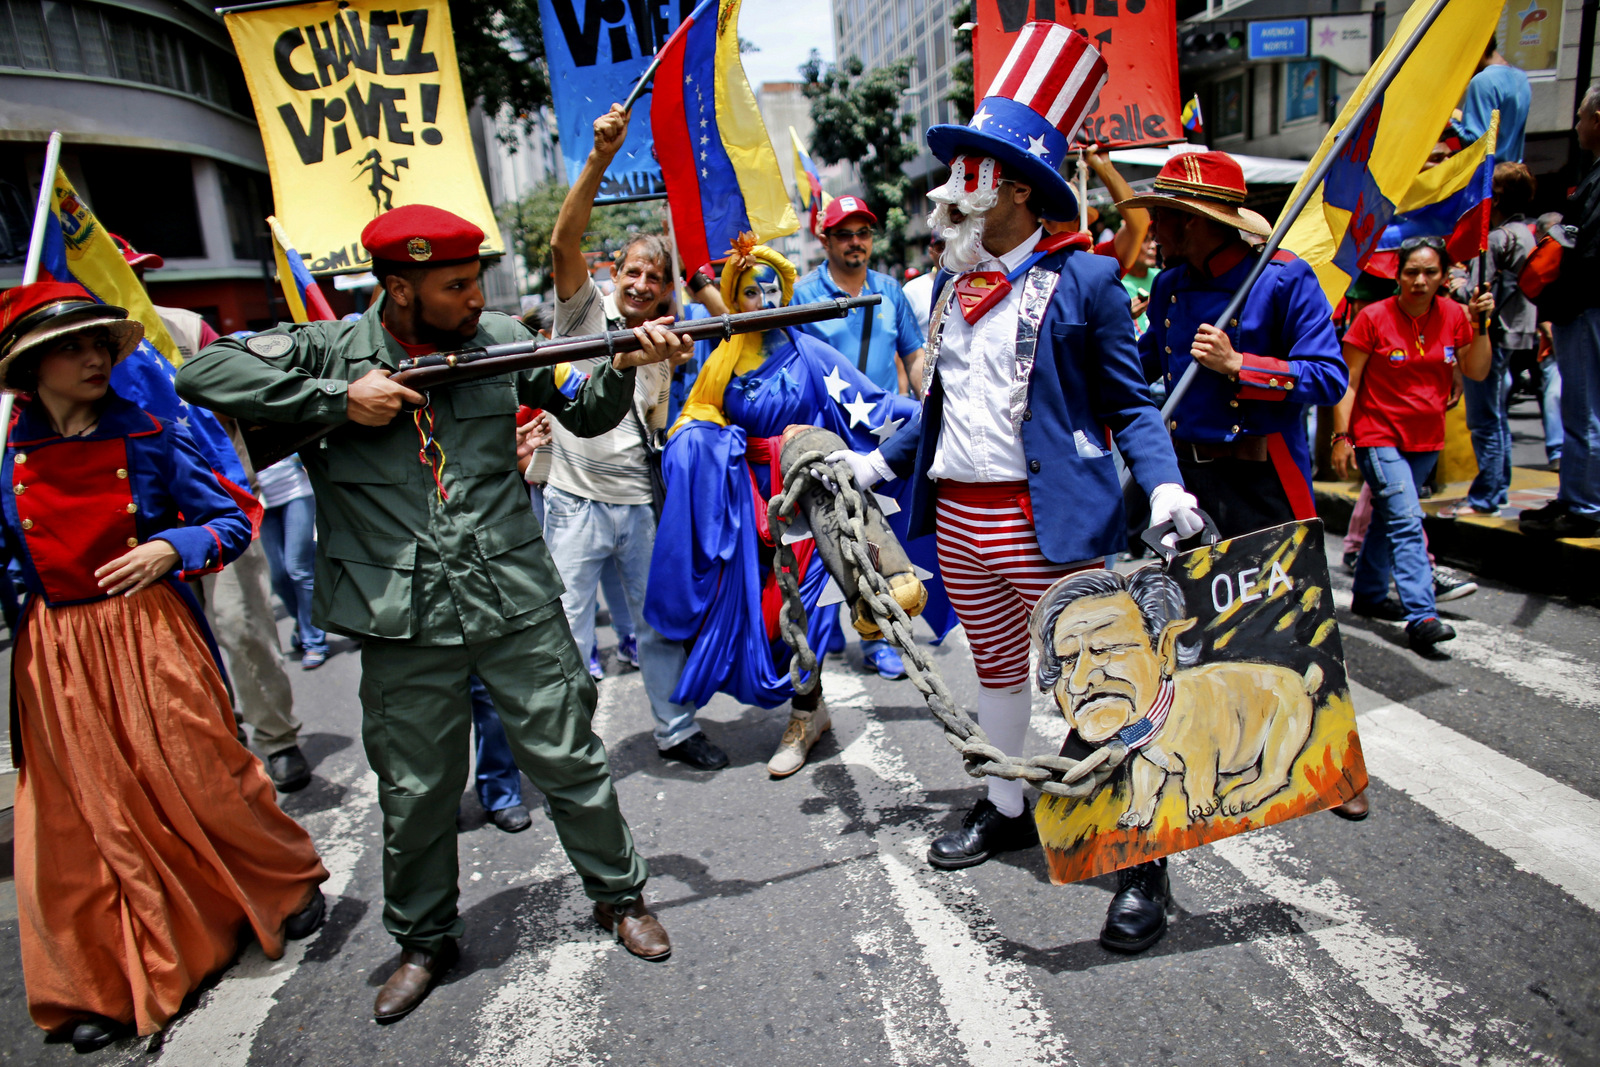 Government supporters perform a parody involving a Venezuelan militia up against Uncle Sam, a personification of the U.S government, during an anti-imperialist march to denounce Trump's talk of a "military option" for resolving the country's political crisis, in Caracas, Venezuela, Aug. 14, 2017. (AP/Ariana Cubillos)